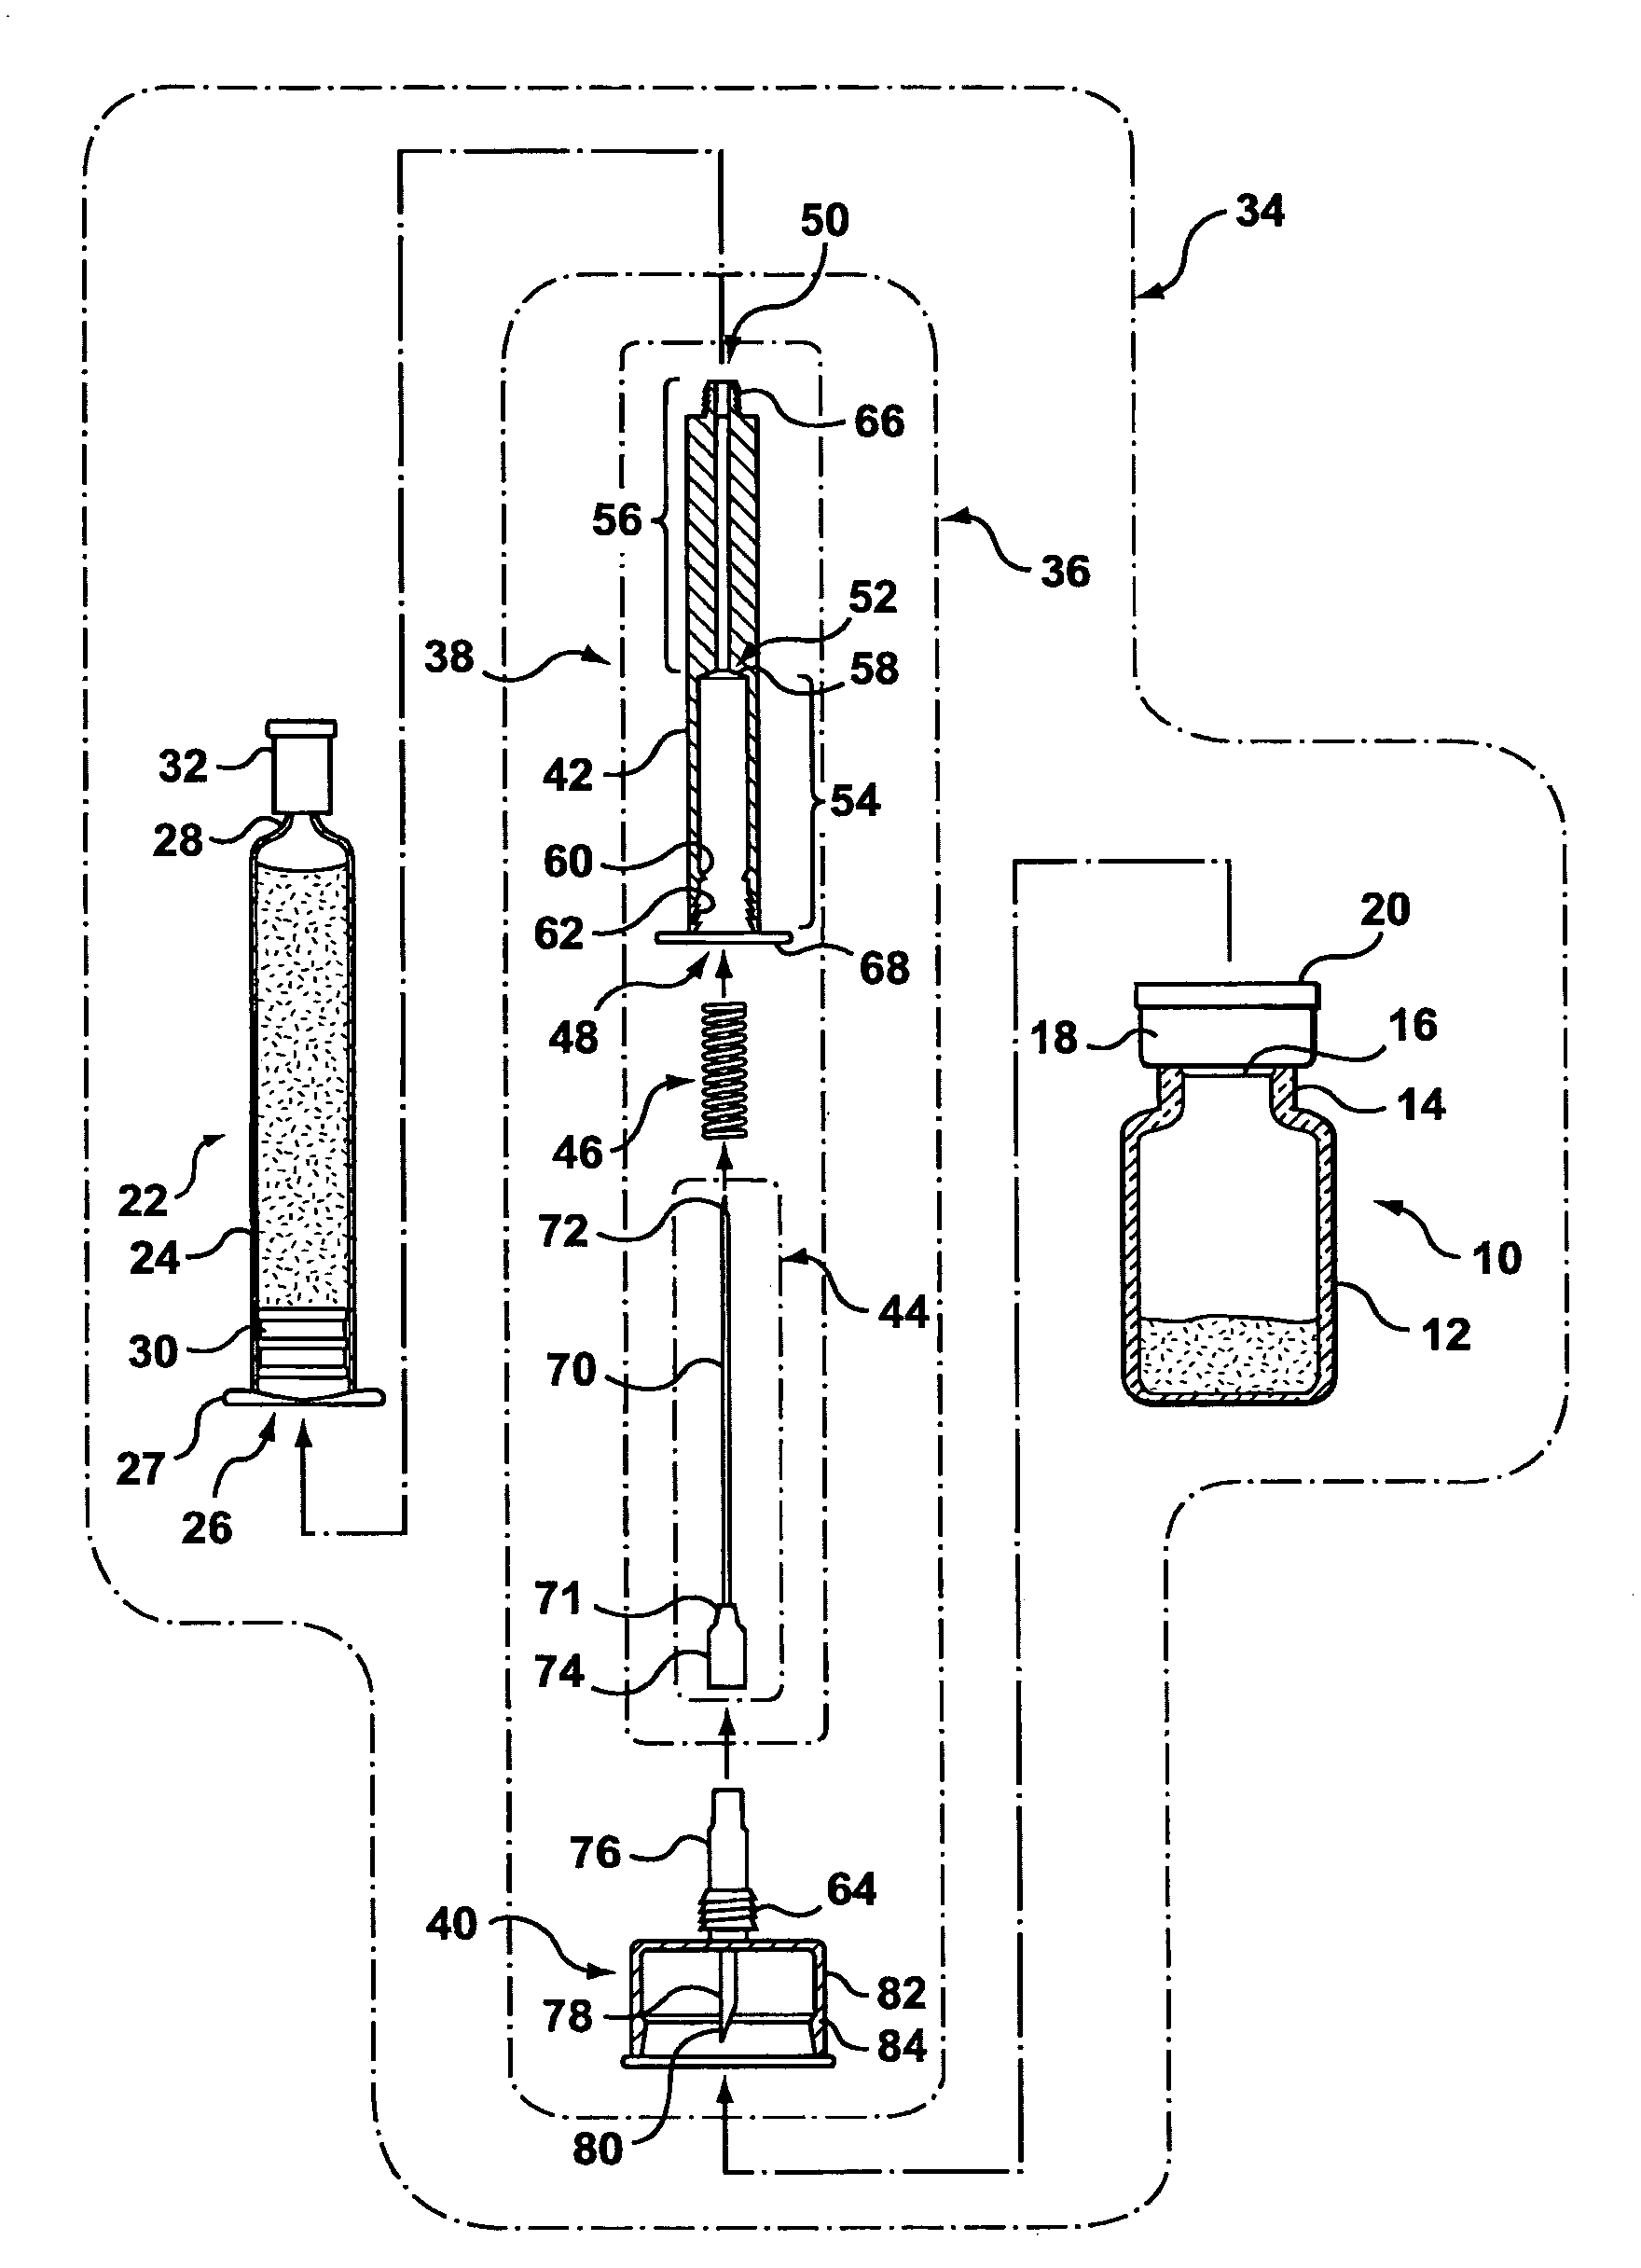 Fluid transfer assembly for pharmaceutical delivery system and method for using same